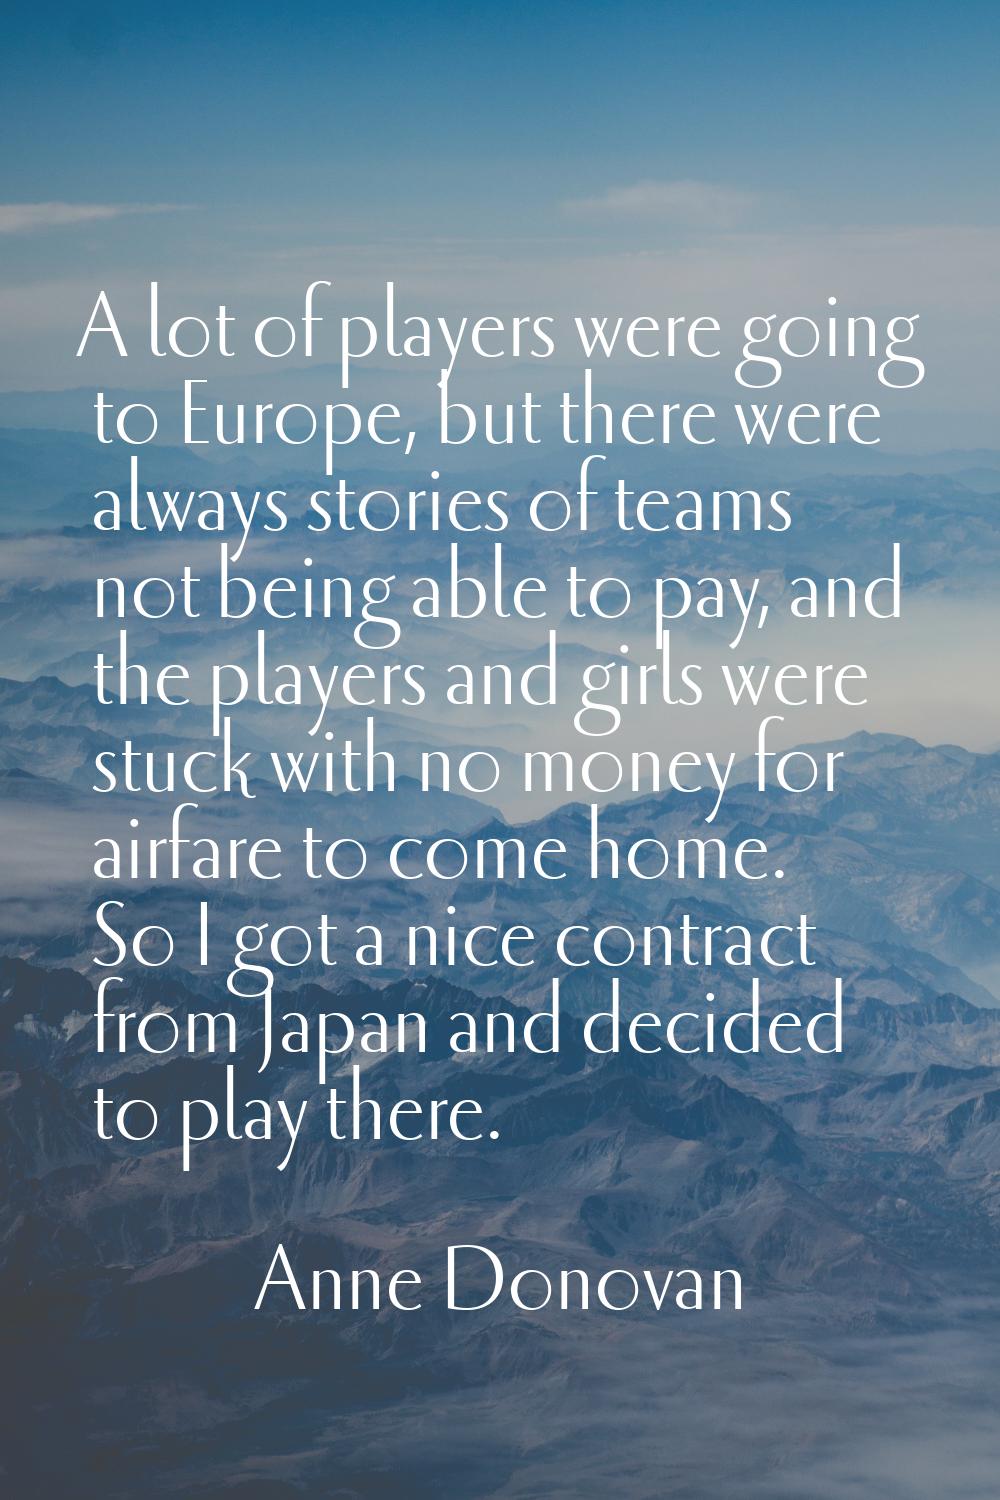 A lot of players were going to Europe, but there were always stories of teams not being able to pay